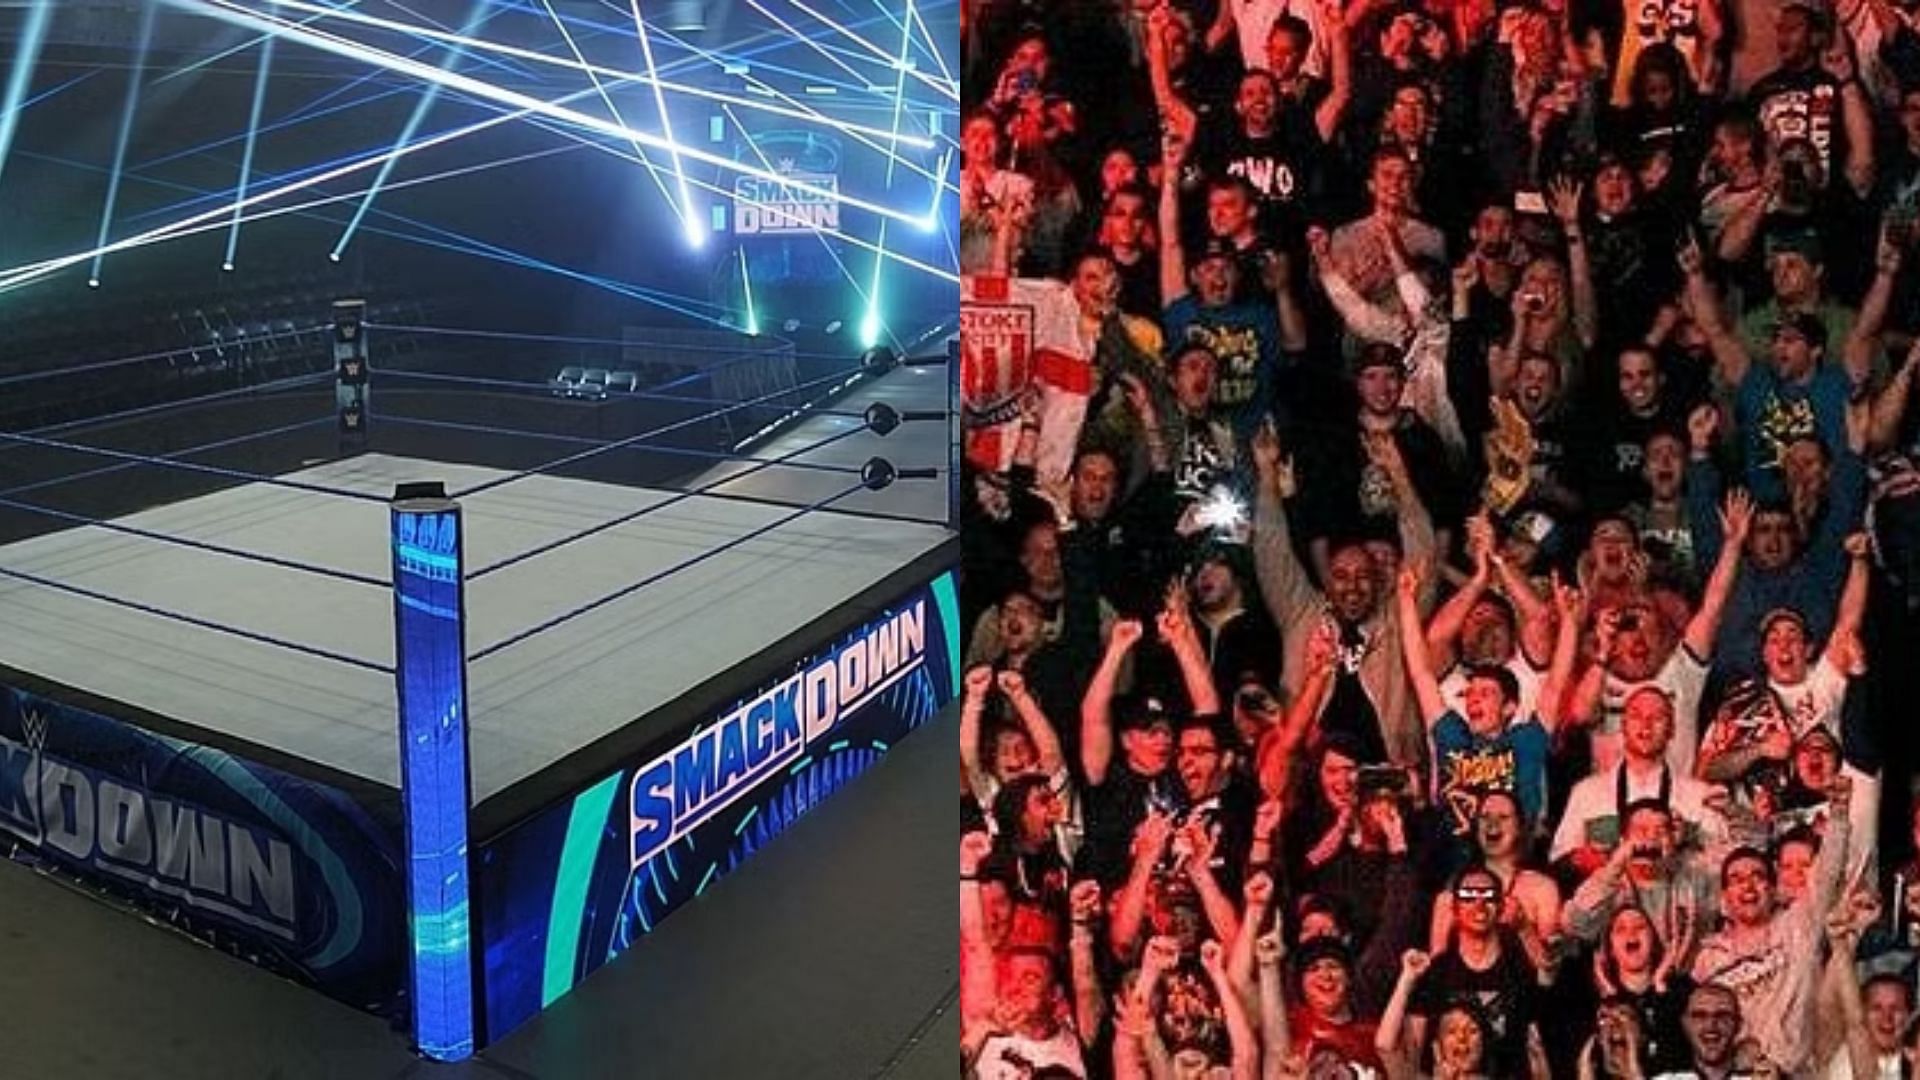 A new look team will take part in a match on WWE Smackdown according to rumors